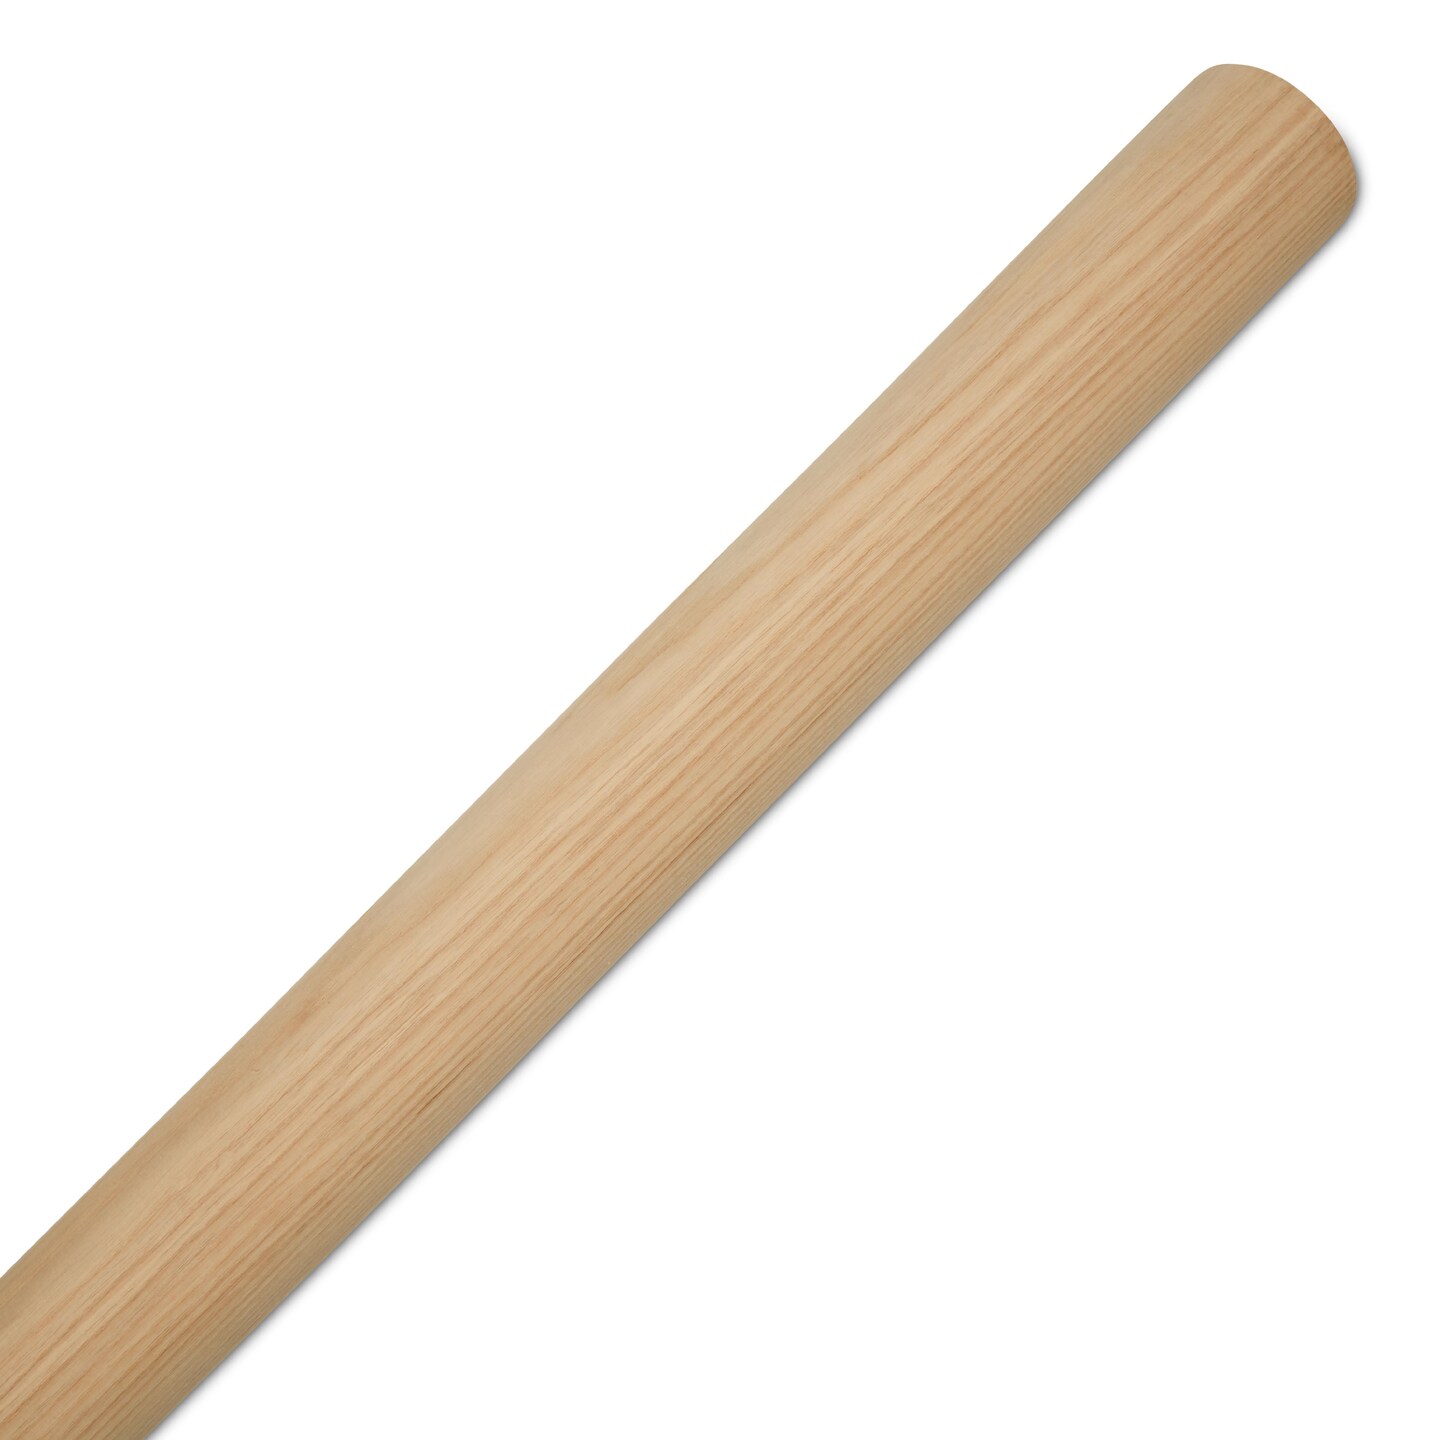 Wooden Dowel Rods 2 inch Thick, Multiple Lengths Available, Unfinished  Sticks Crafts & DIY, Woodpeckers